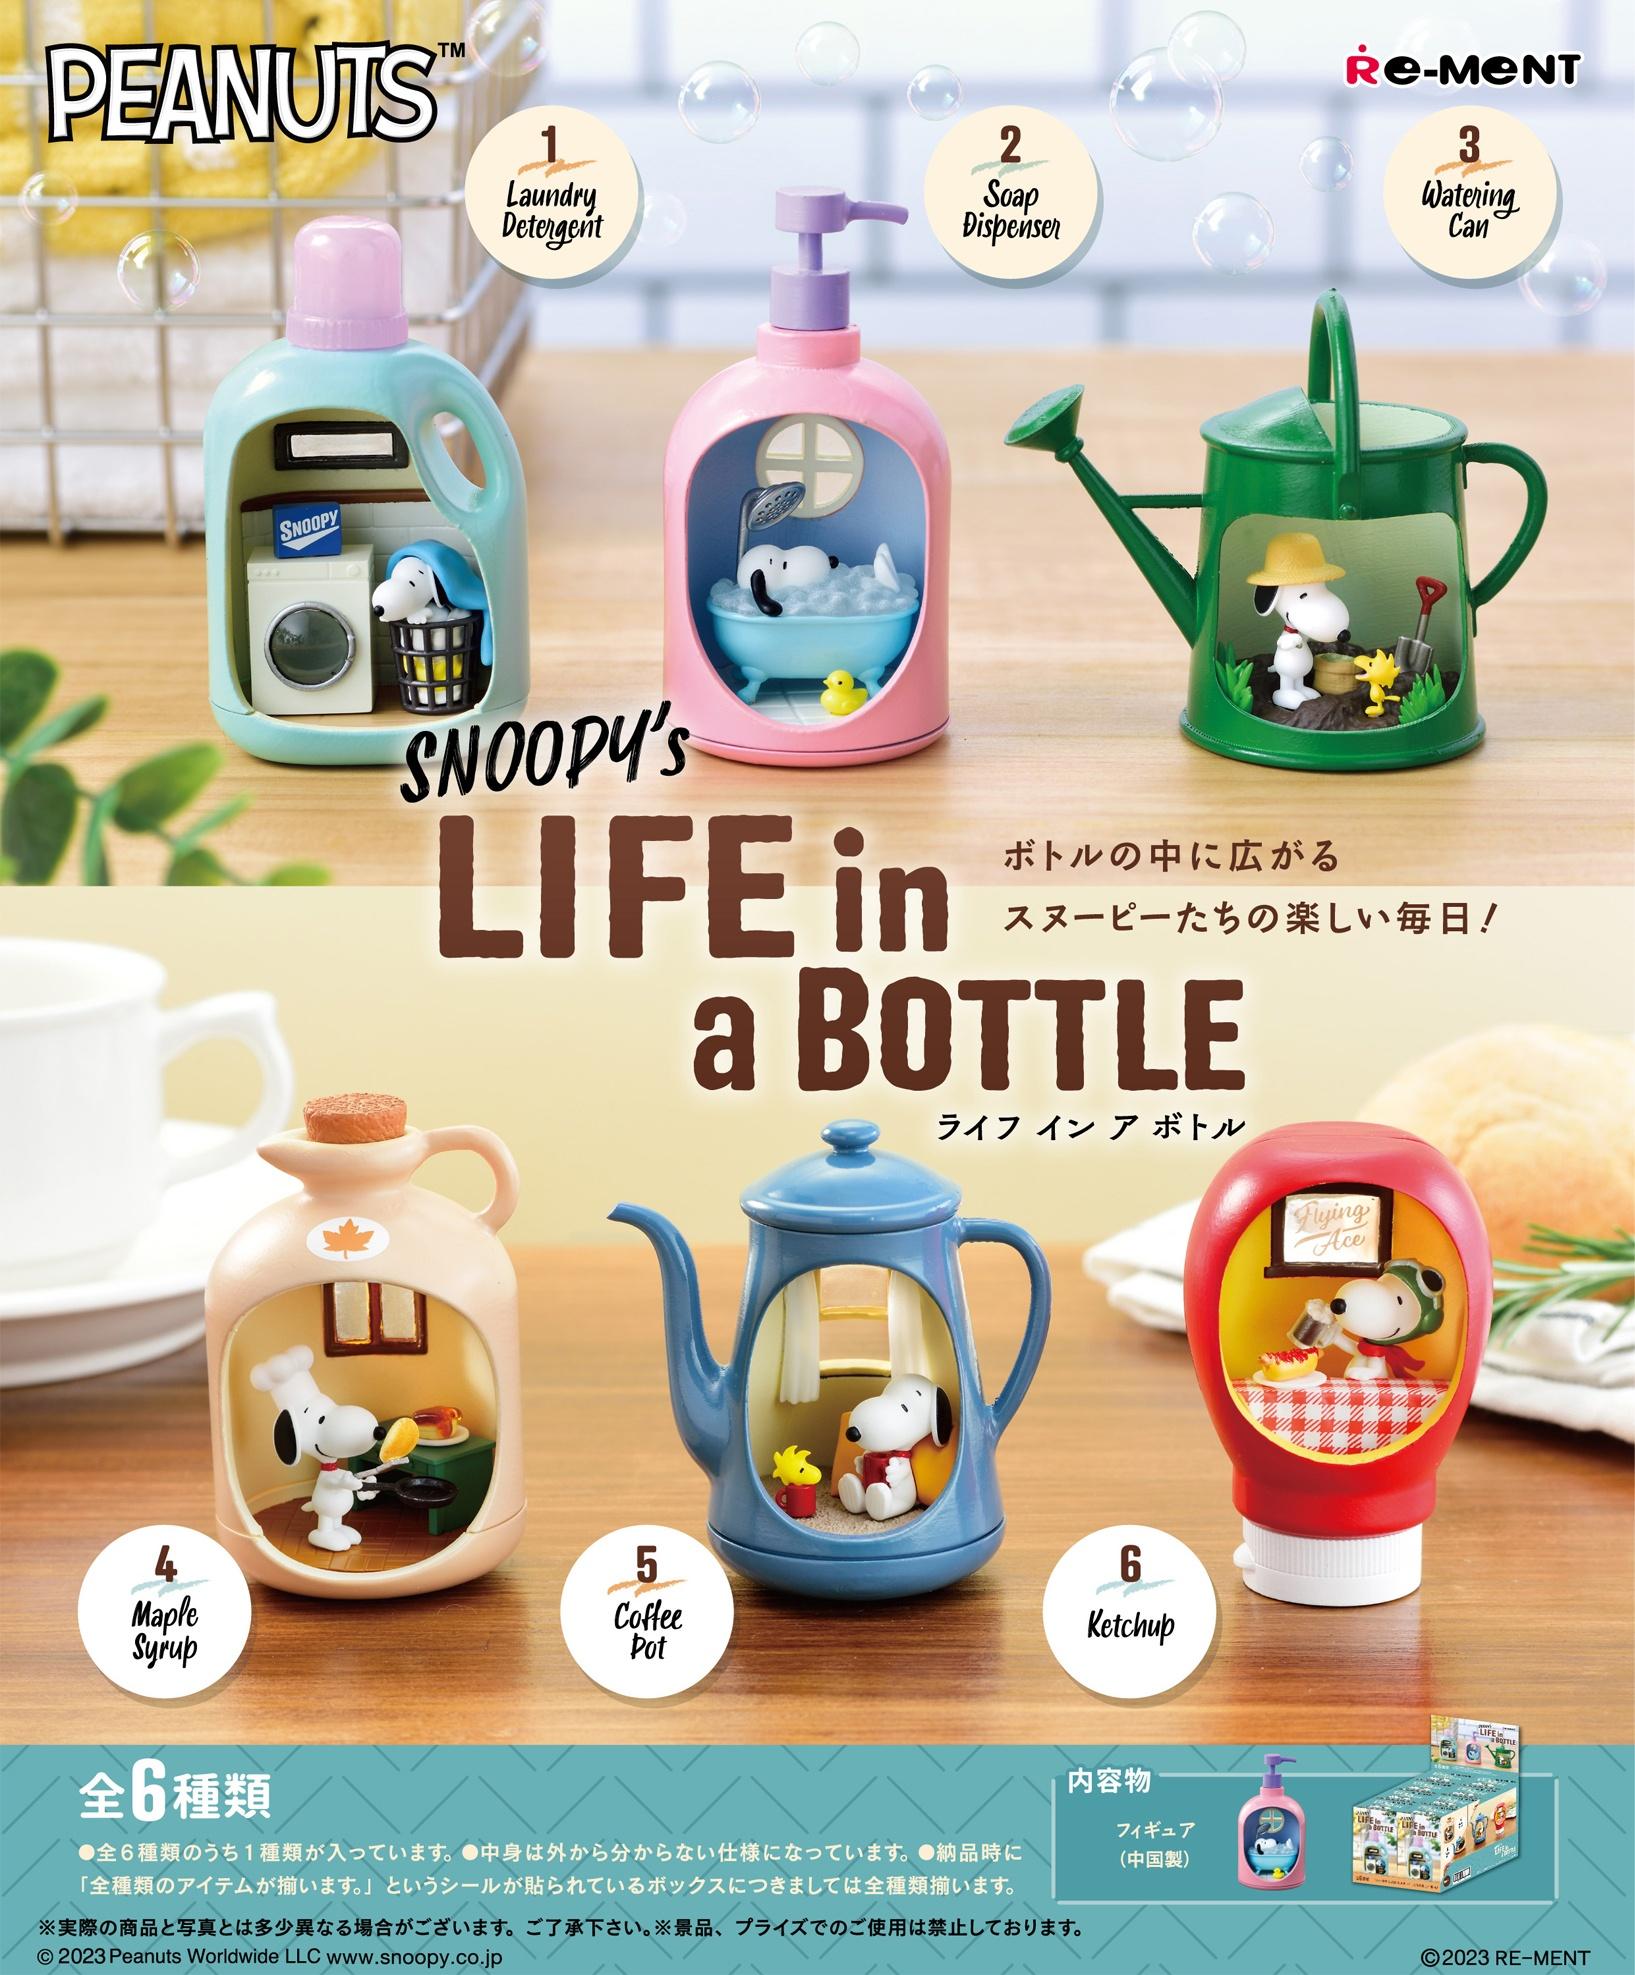 Peanuts - SNOOPY's LIFE in a BOTTLE